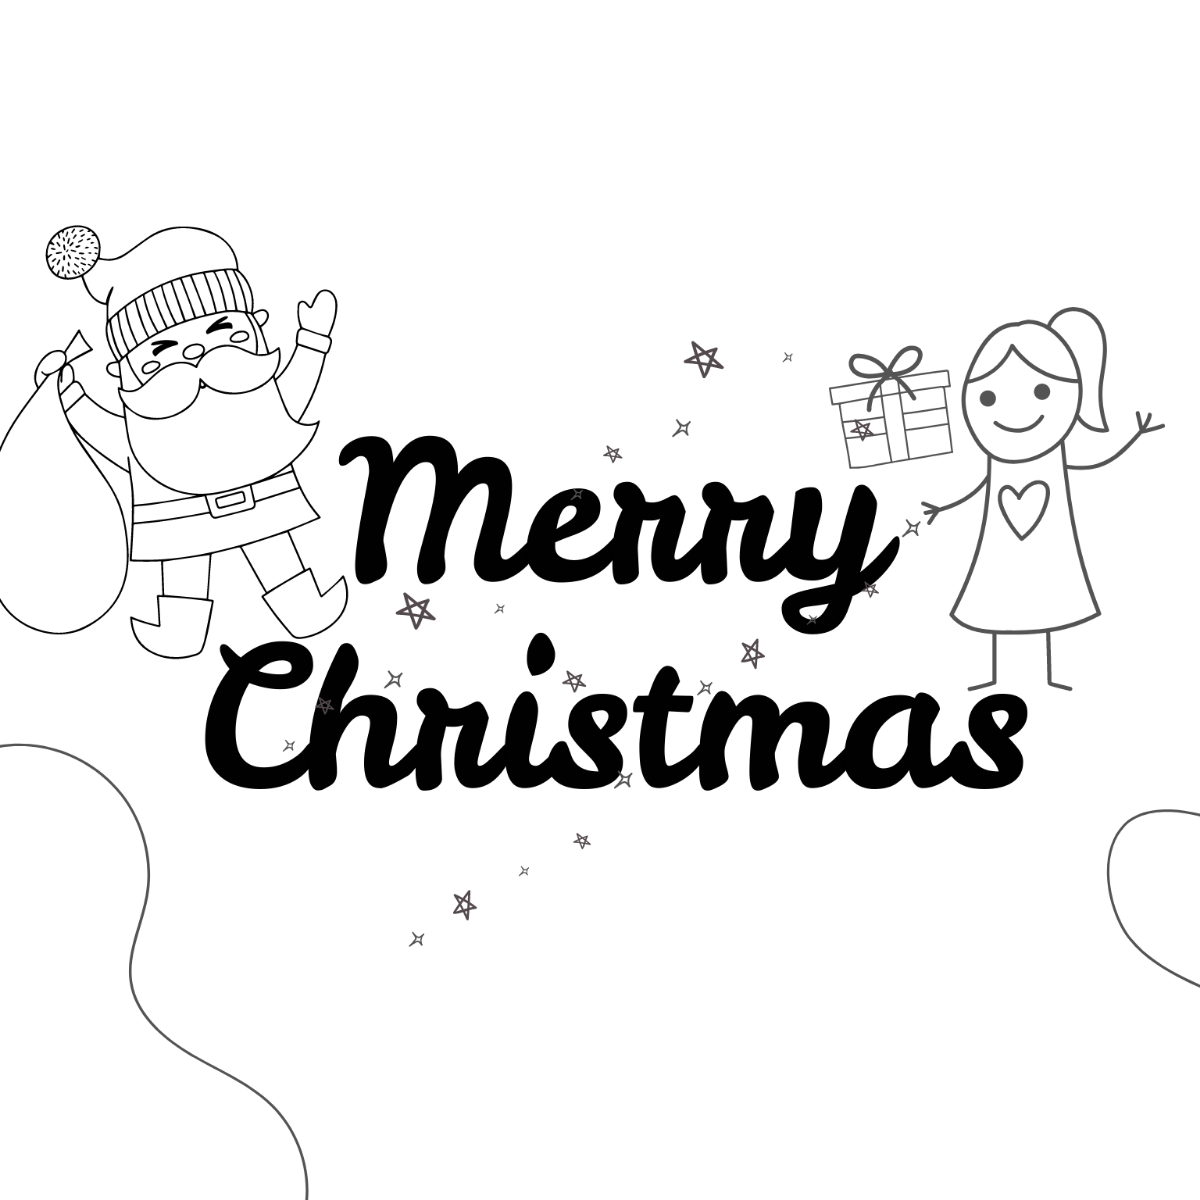 Merry Christmas drawing | How to draw Easy Christmas tree and Candy canes  with falling snowflakes - YouTube